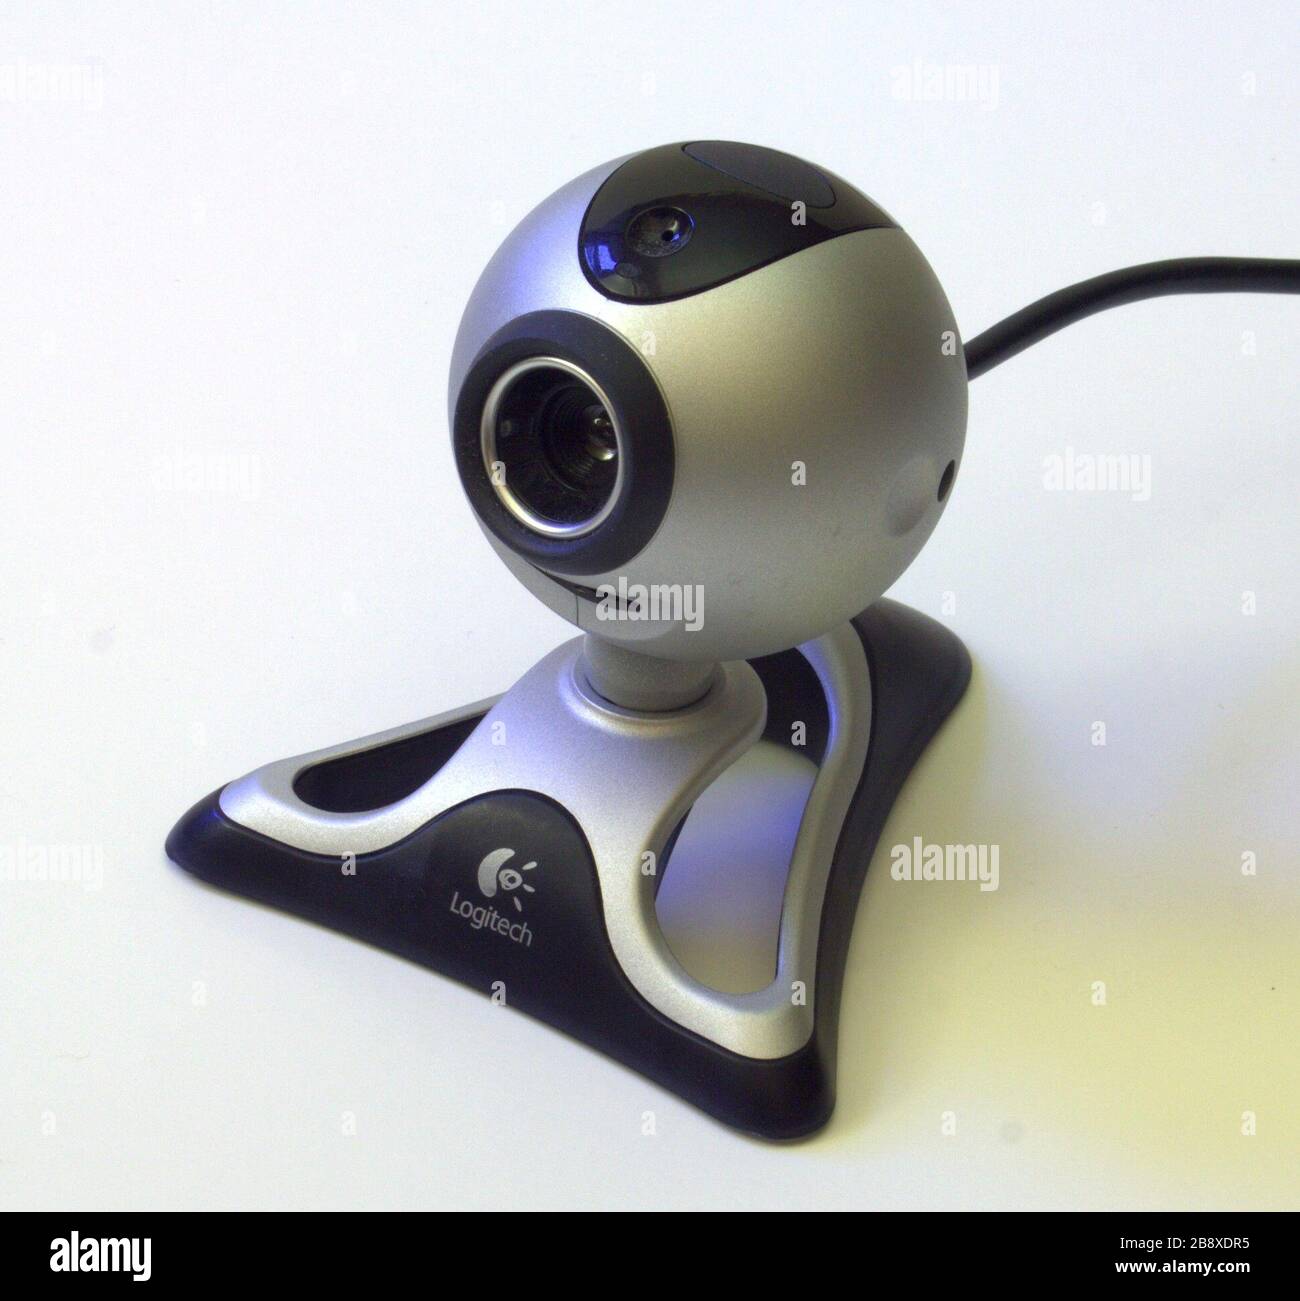 English: Logitech Quickcam Pro 4000 webcam (without privacy cover); 19  December 2007; Own work; Dave Pape Stock Photo - Alamy